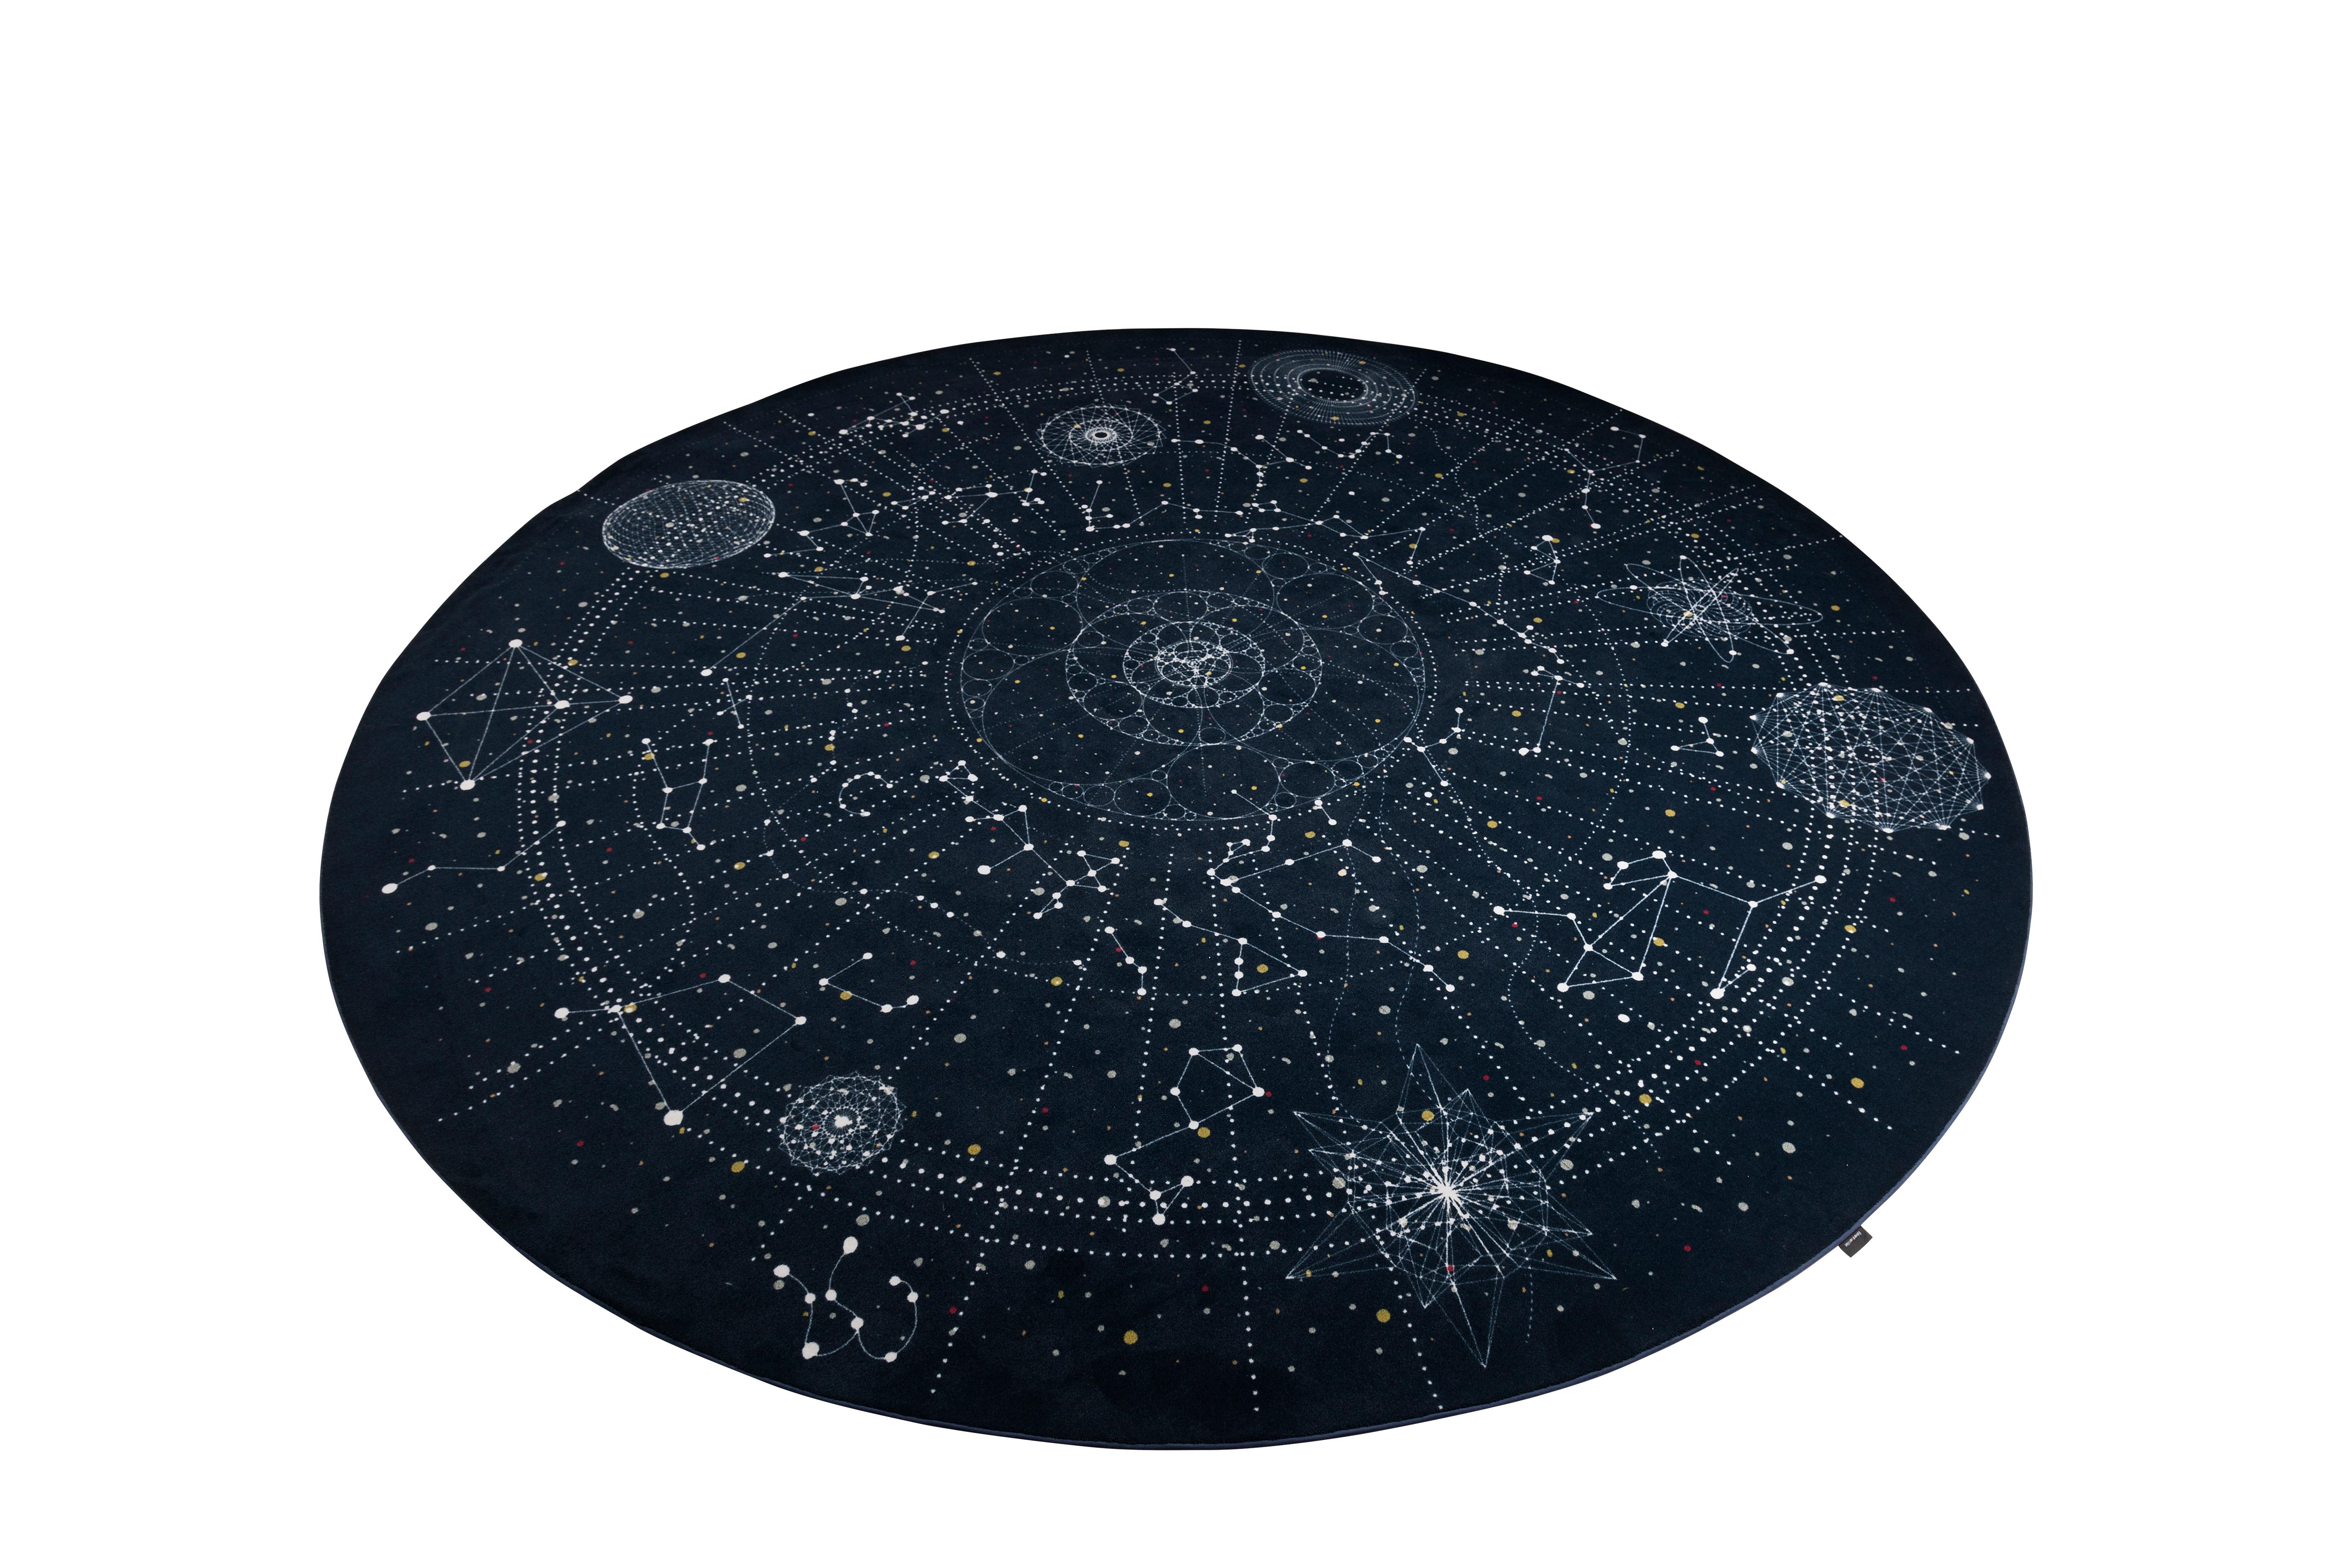 Moooi Small Celestial rug in Low Pile Polyamide by Edward van Vliet

After his graduation from the Design Academy Eindhoven in 1989 – Edward belongs to the famous generation of Dutch designers who have been causing international sensation for many